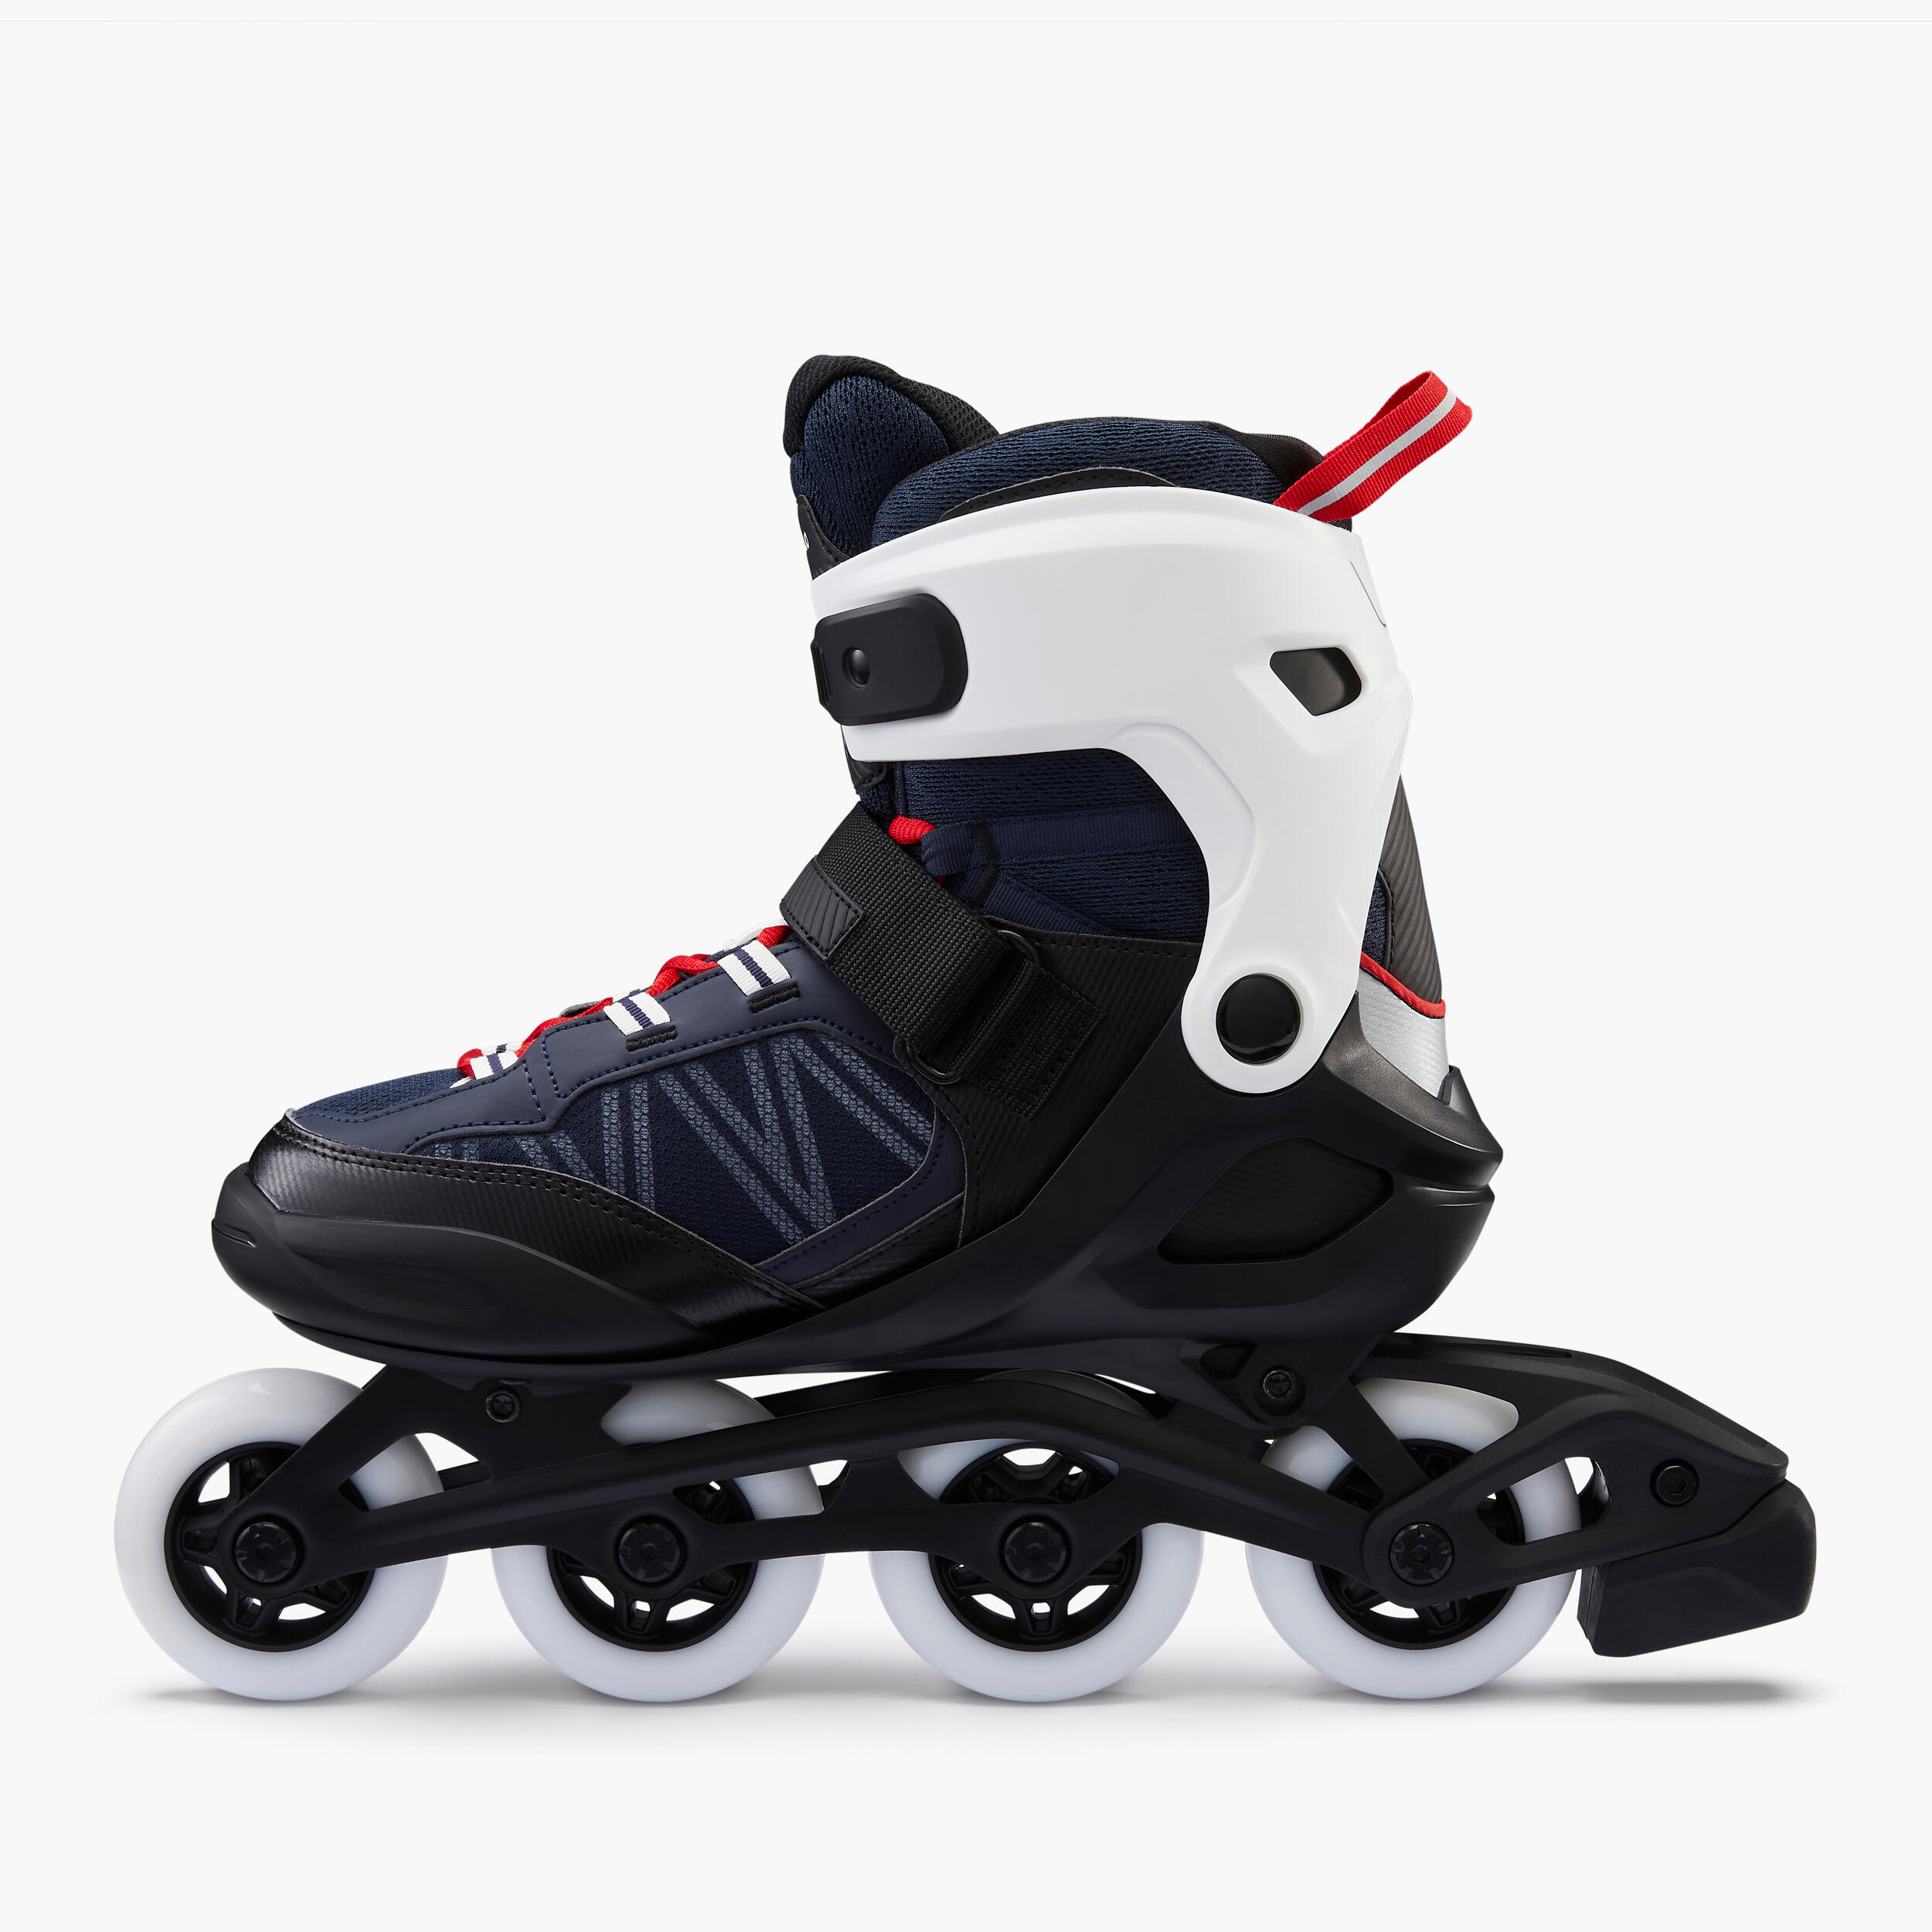 In-line Skates - FIT 500 Blue/Red - OXELO